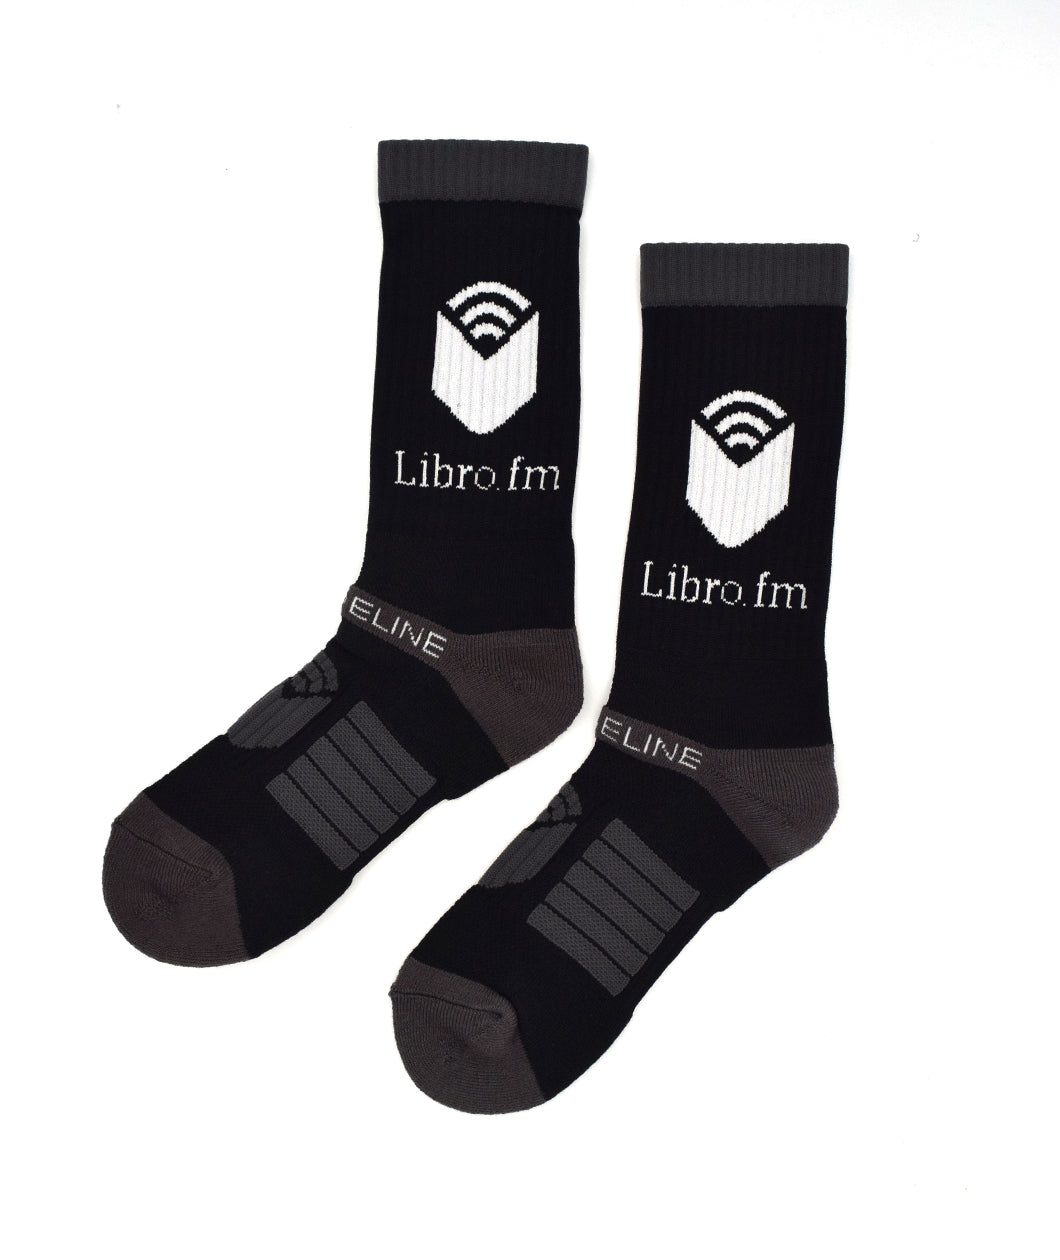 Black socks with a gray ankle, heal, and toe with gray rectangular lines on the toe with a gray open book on the top of the toe. “Libro.fm” is on the top of the sock in white serif font. Above is a white open book - from Libro.fm